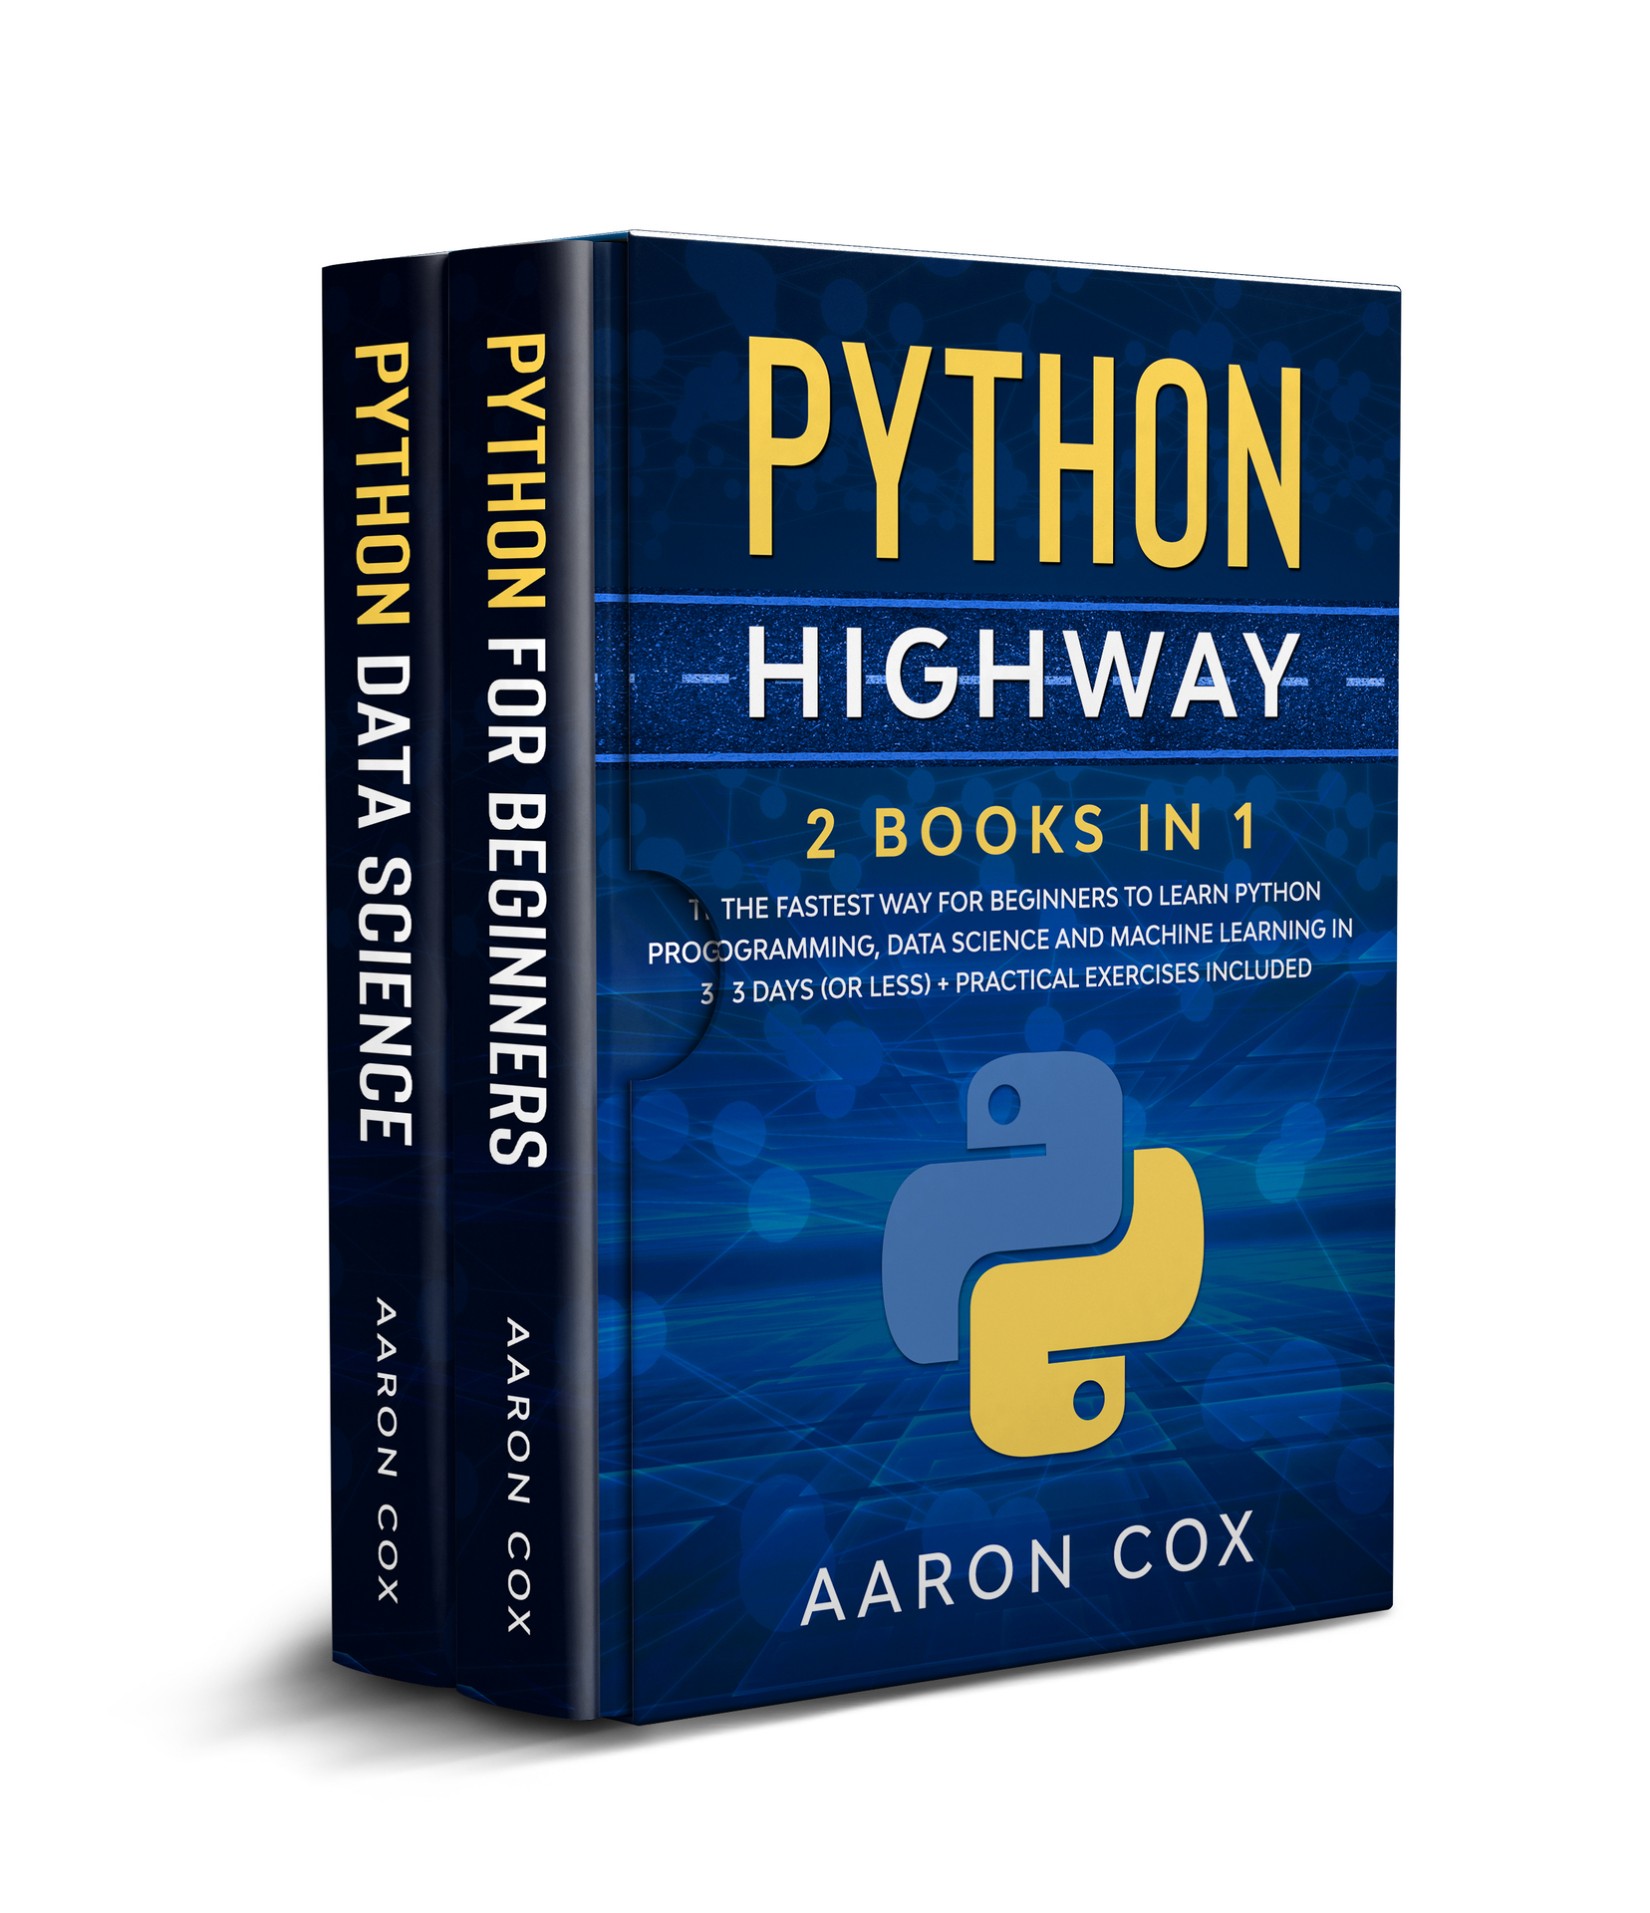 Python Highway: 2 Books in 1: The Fastest Way for Beginners to Learn Python Programming, Data Science and Machine Learning in 3 Days (or less) + Practical Exercises Included